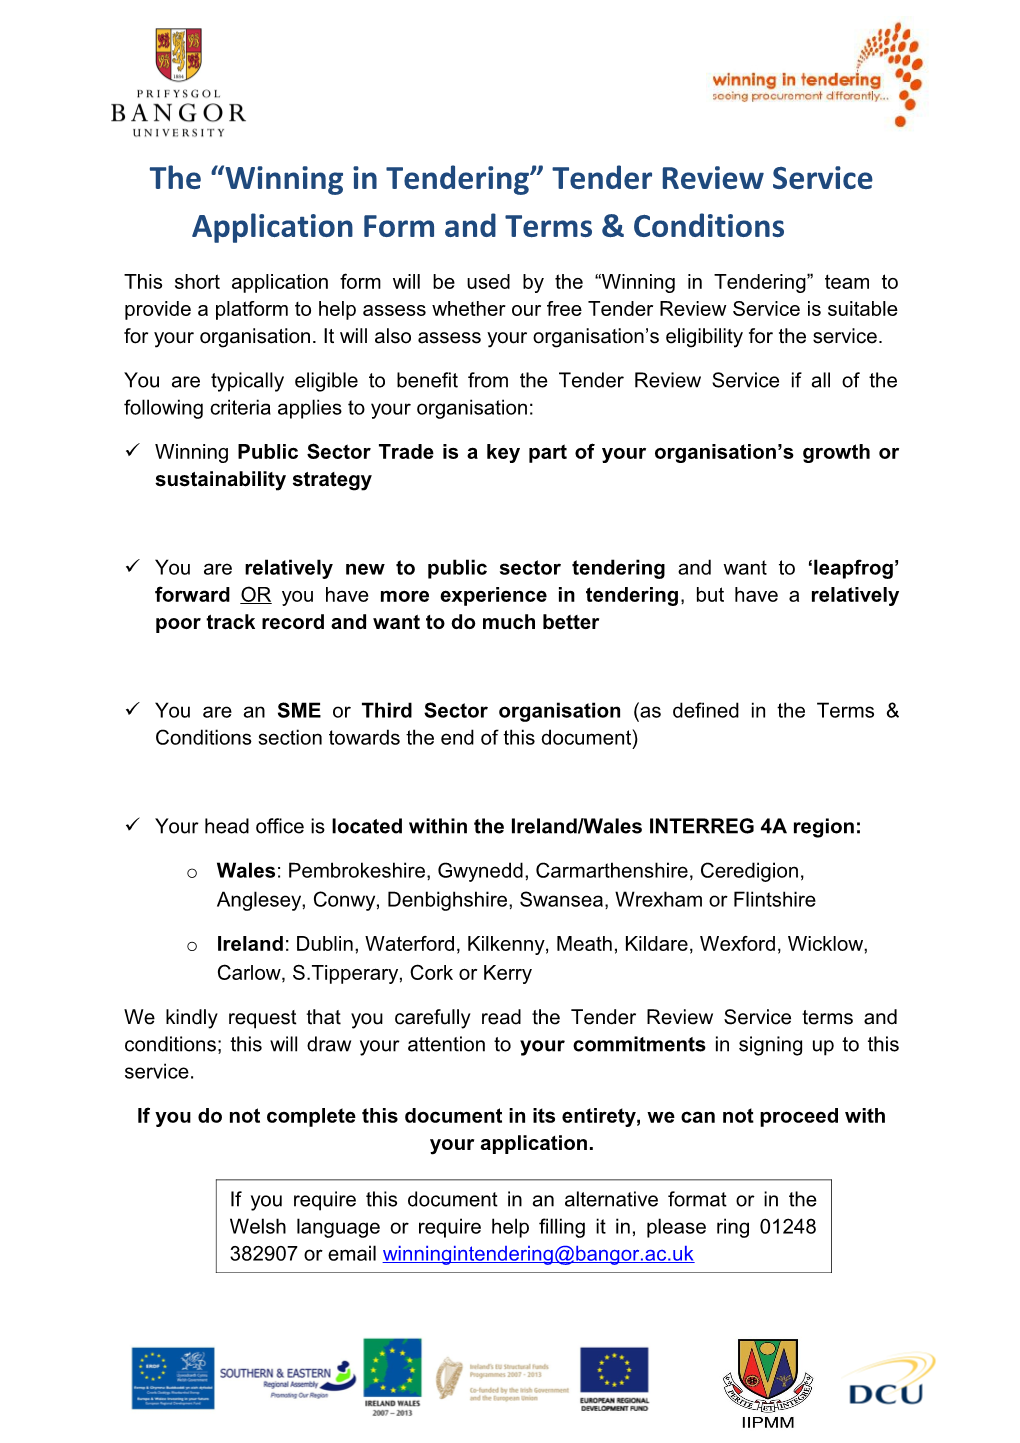 The Winning in Tendering Tender Review Service Application Form and Terms & Conditions